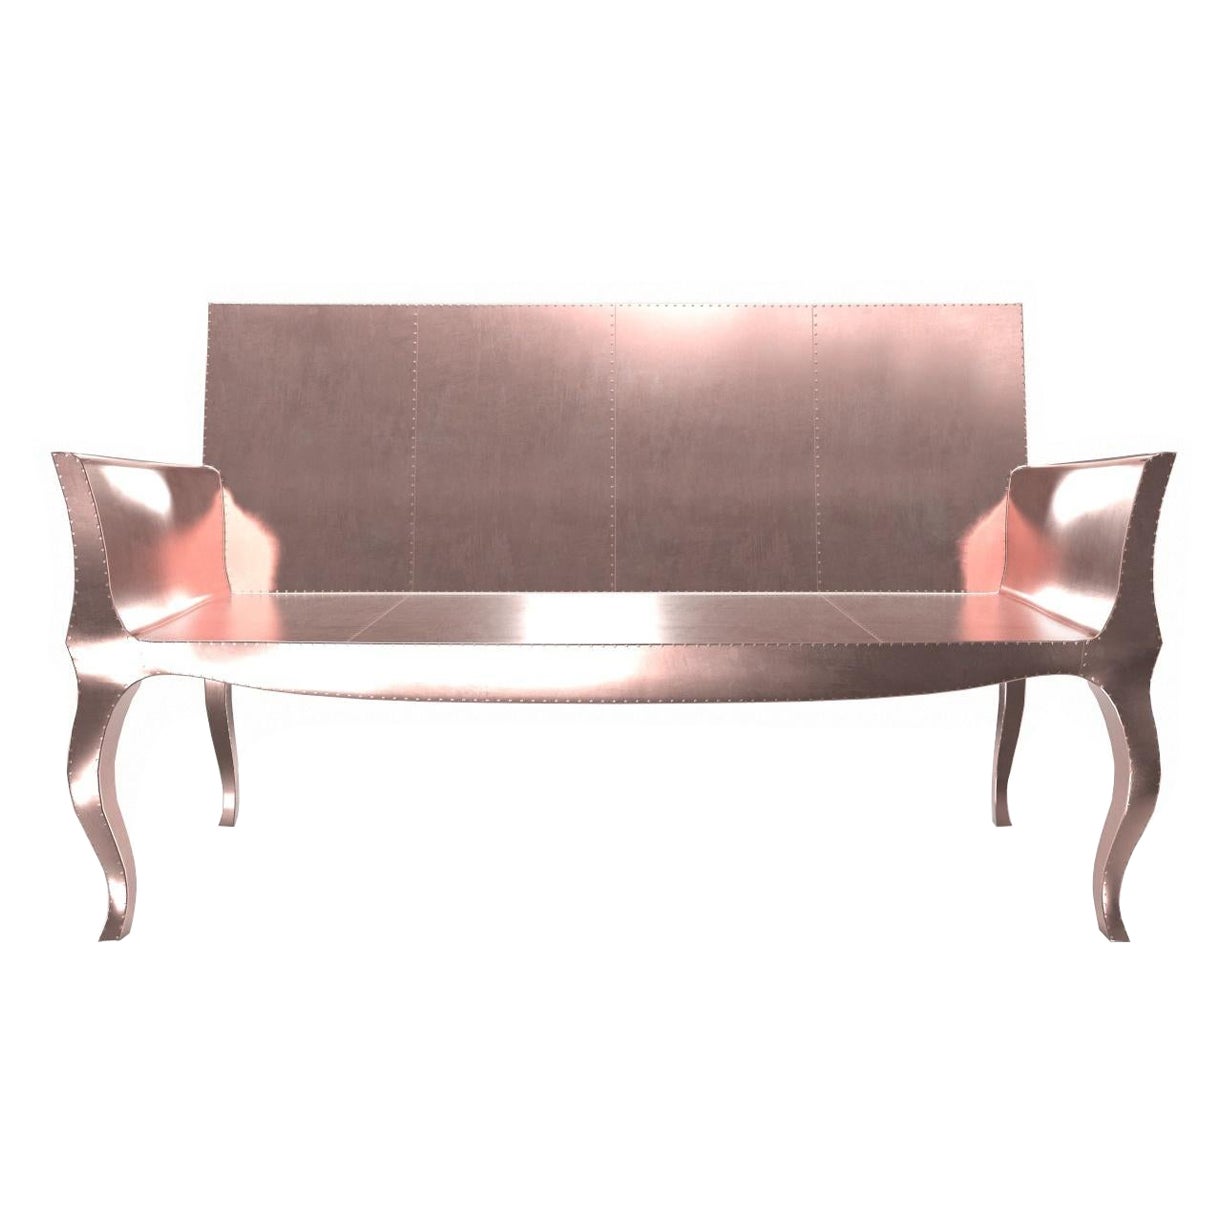 Louise Settee Art Deco Living Room Sets in Smooth Copper by Paul Mathieu 